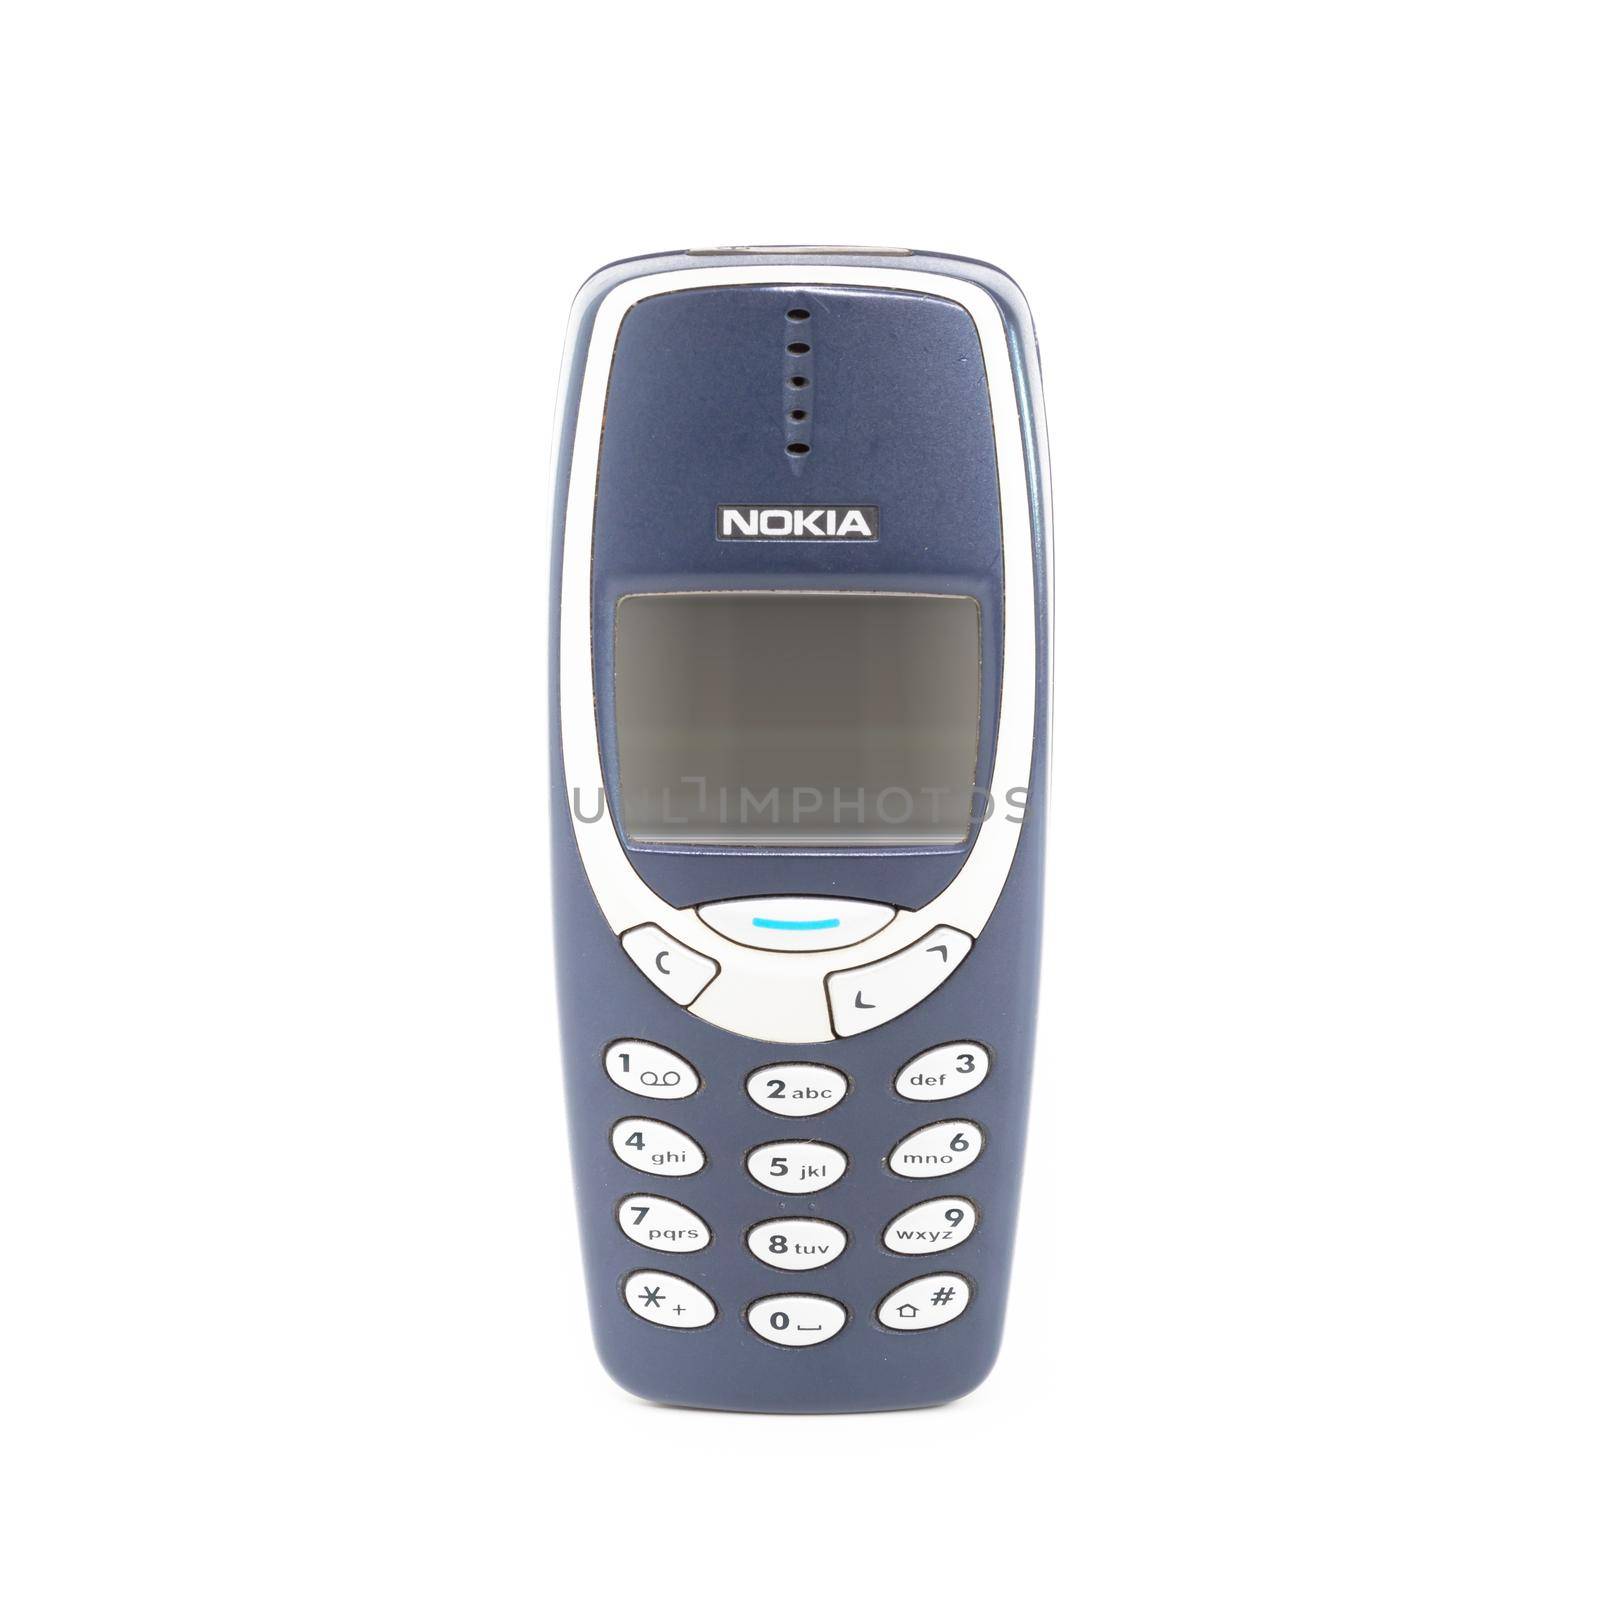 Old mobile phone Nokia 3310 on a white background. Isolated.